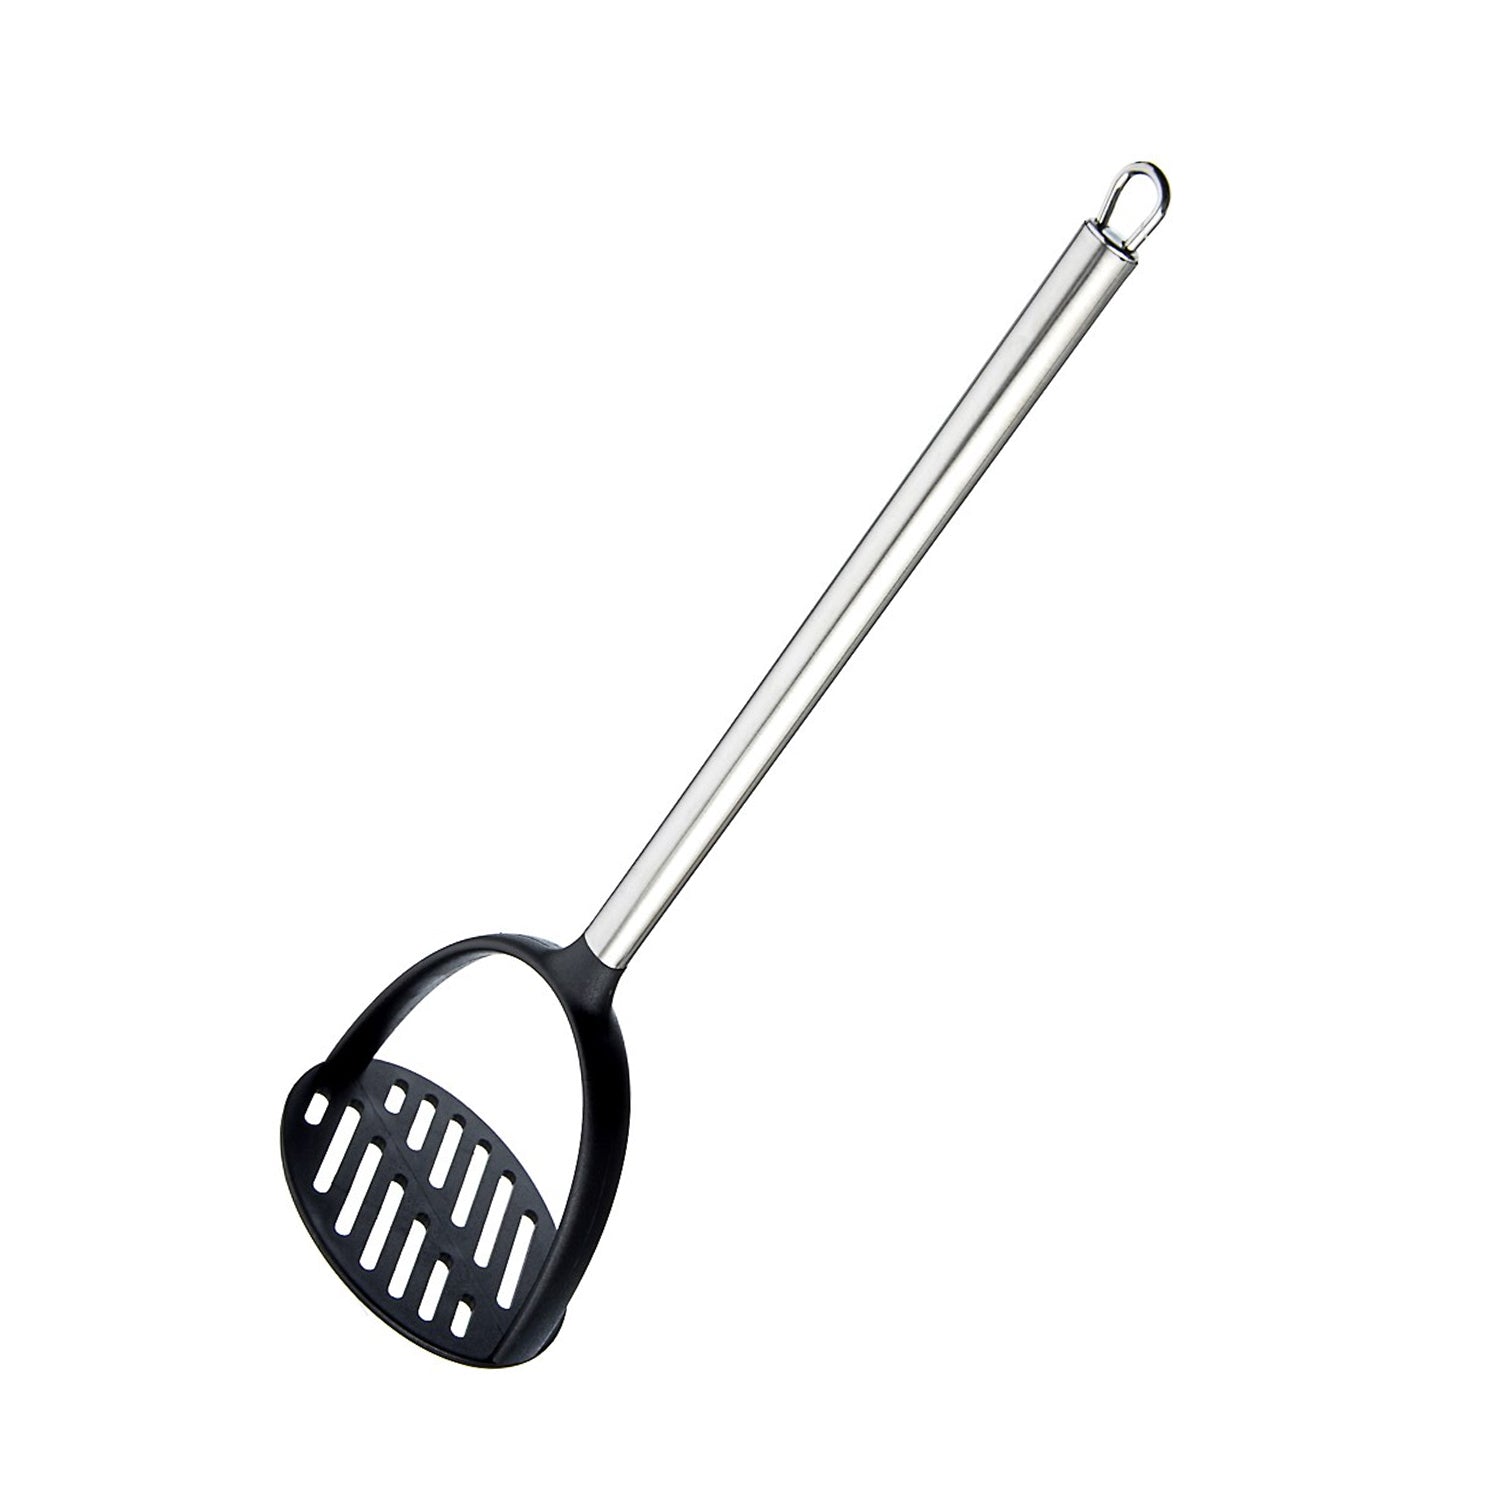 7110 Food Masher With Steel Handle For Cooking Use ( 1 pcs ) DeoDap